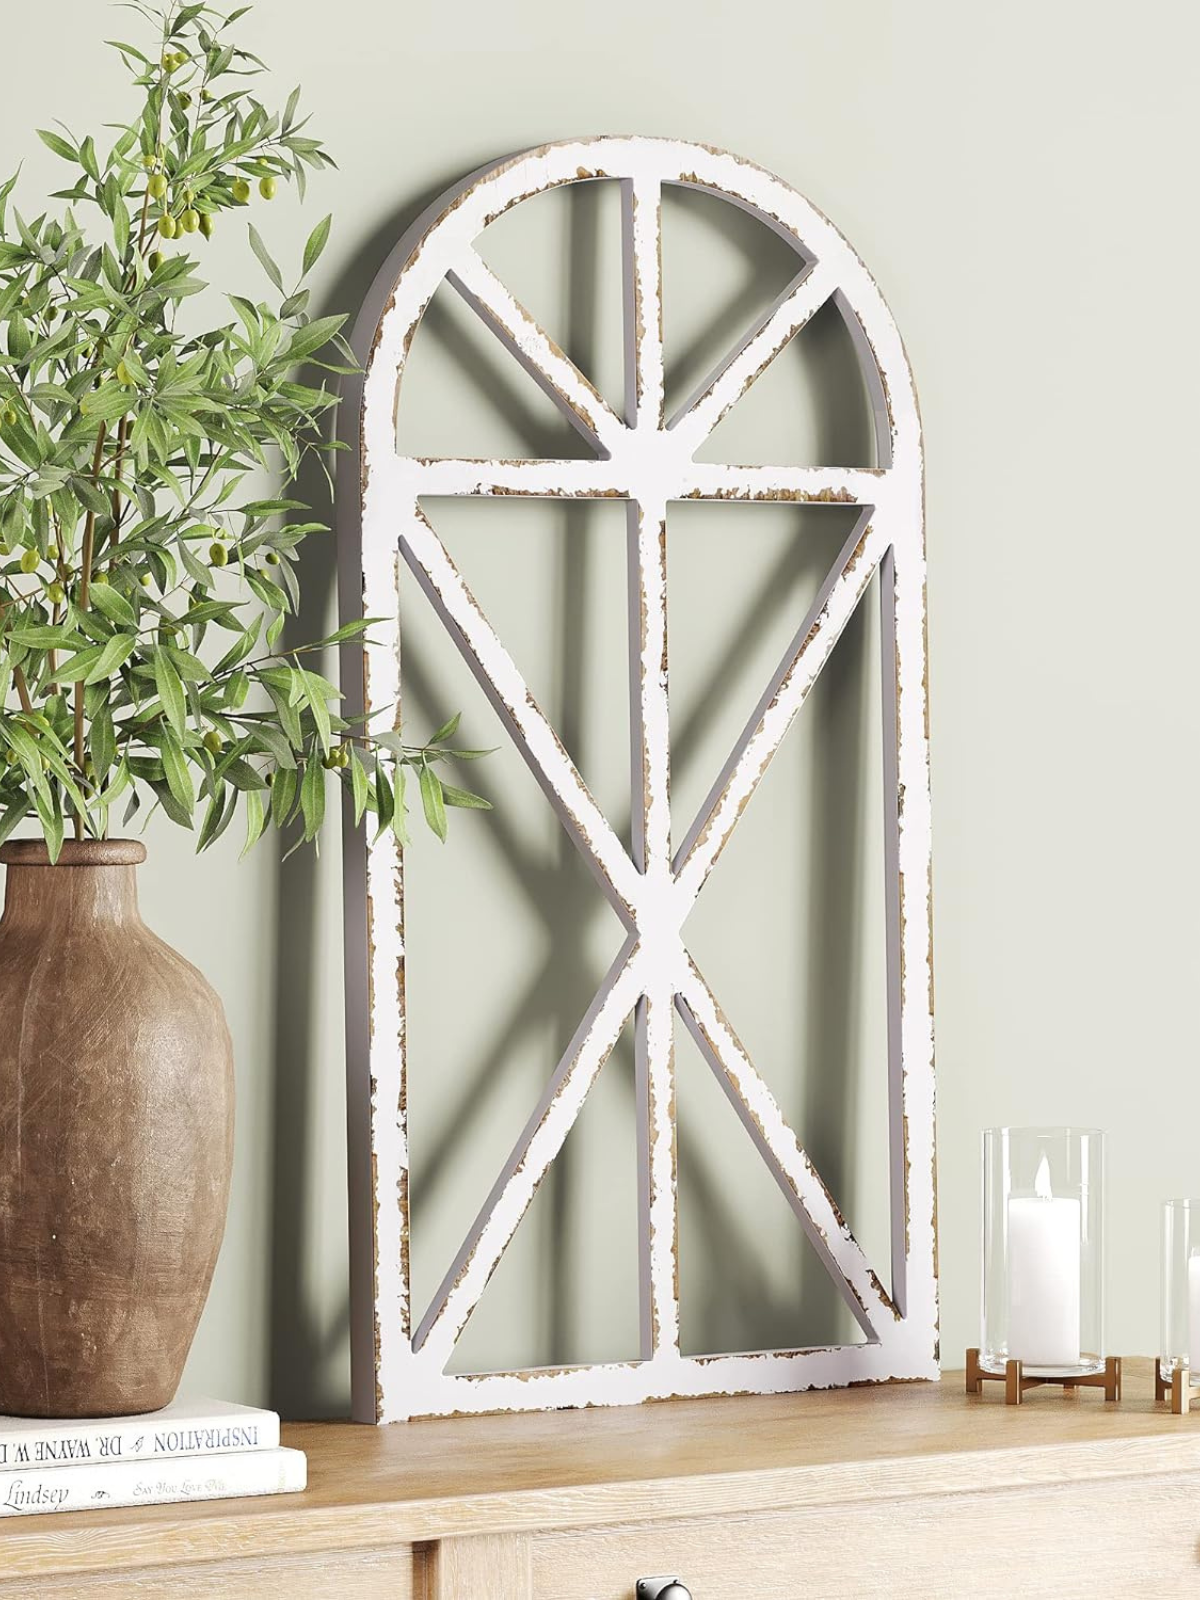 Rustic Wood Window Frame Wall Decor, Decorative Wooden Cathedral Arch, Farmhouse Wall Art Home Decoration, Distressed White Finish, 80 x 40 x 2.5cm (2 Pack)